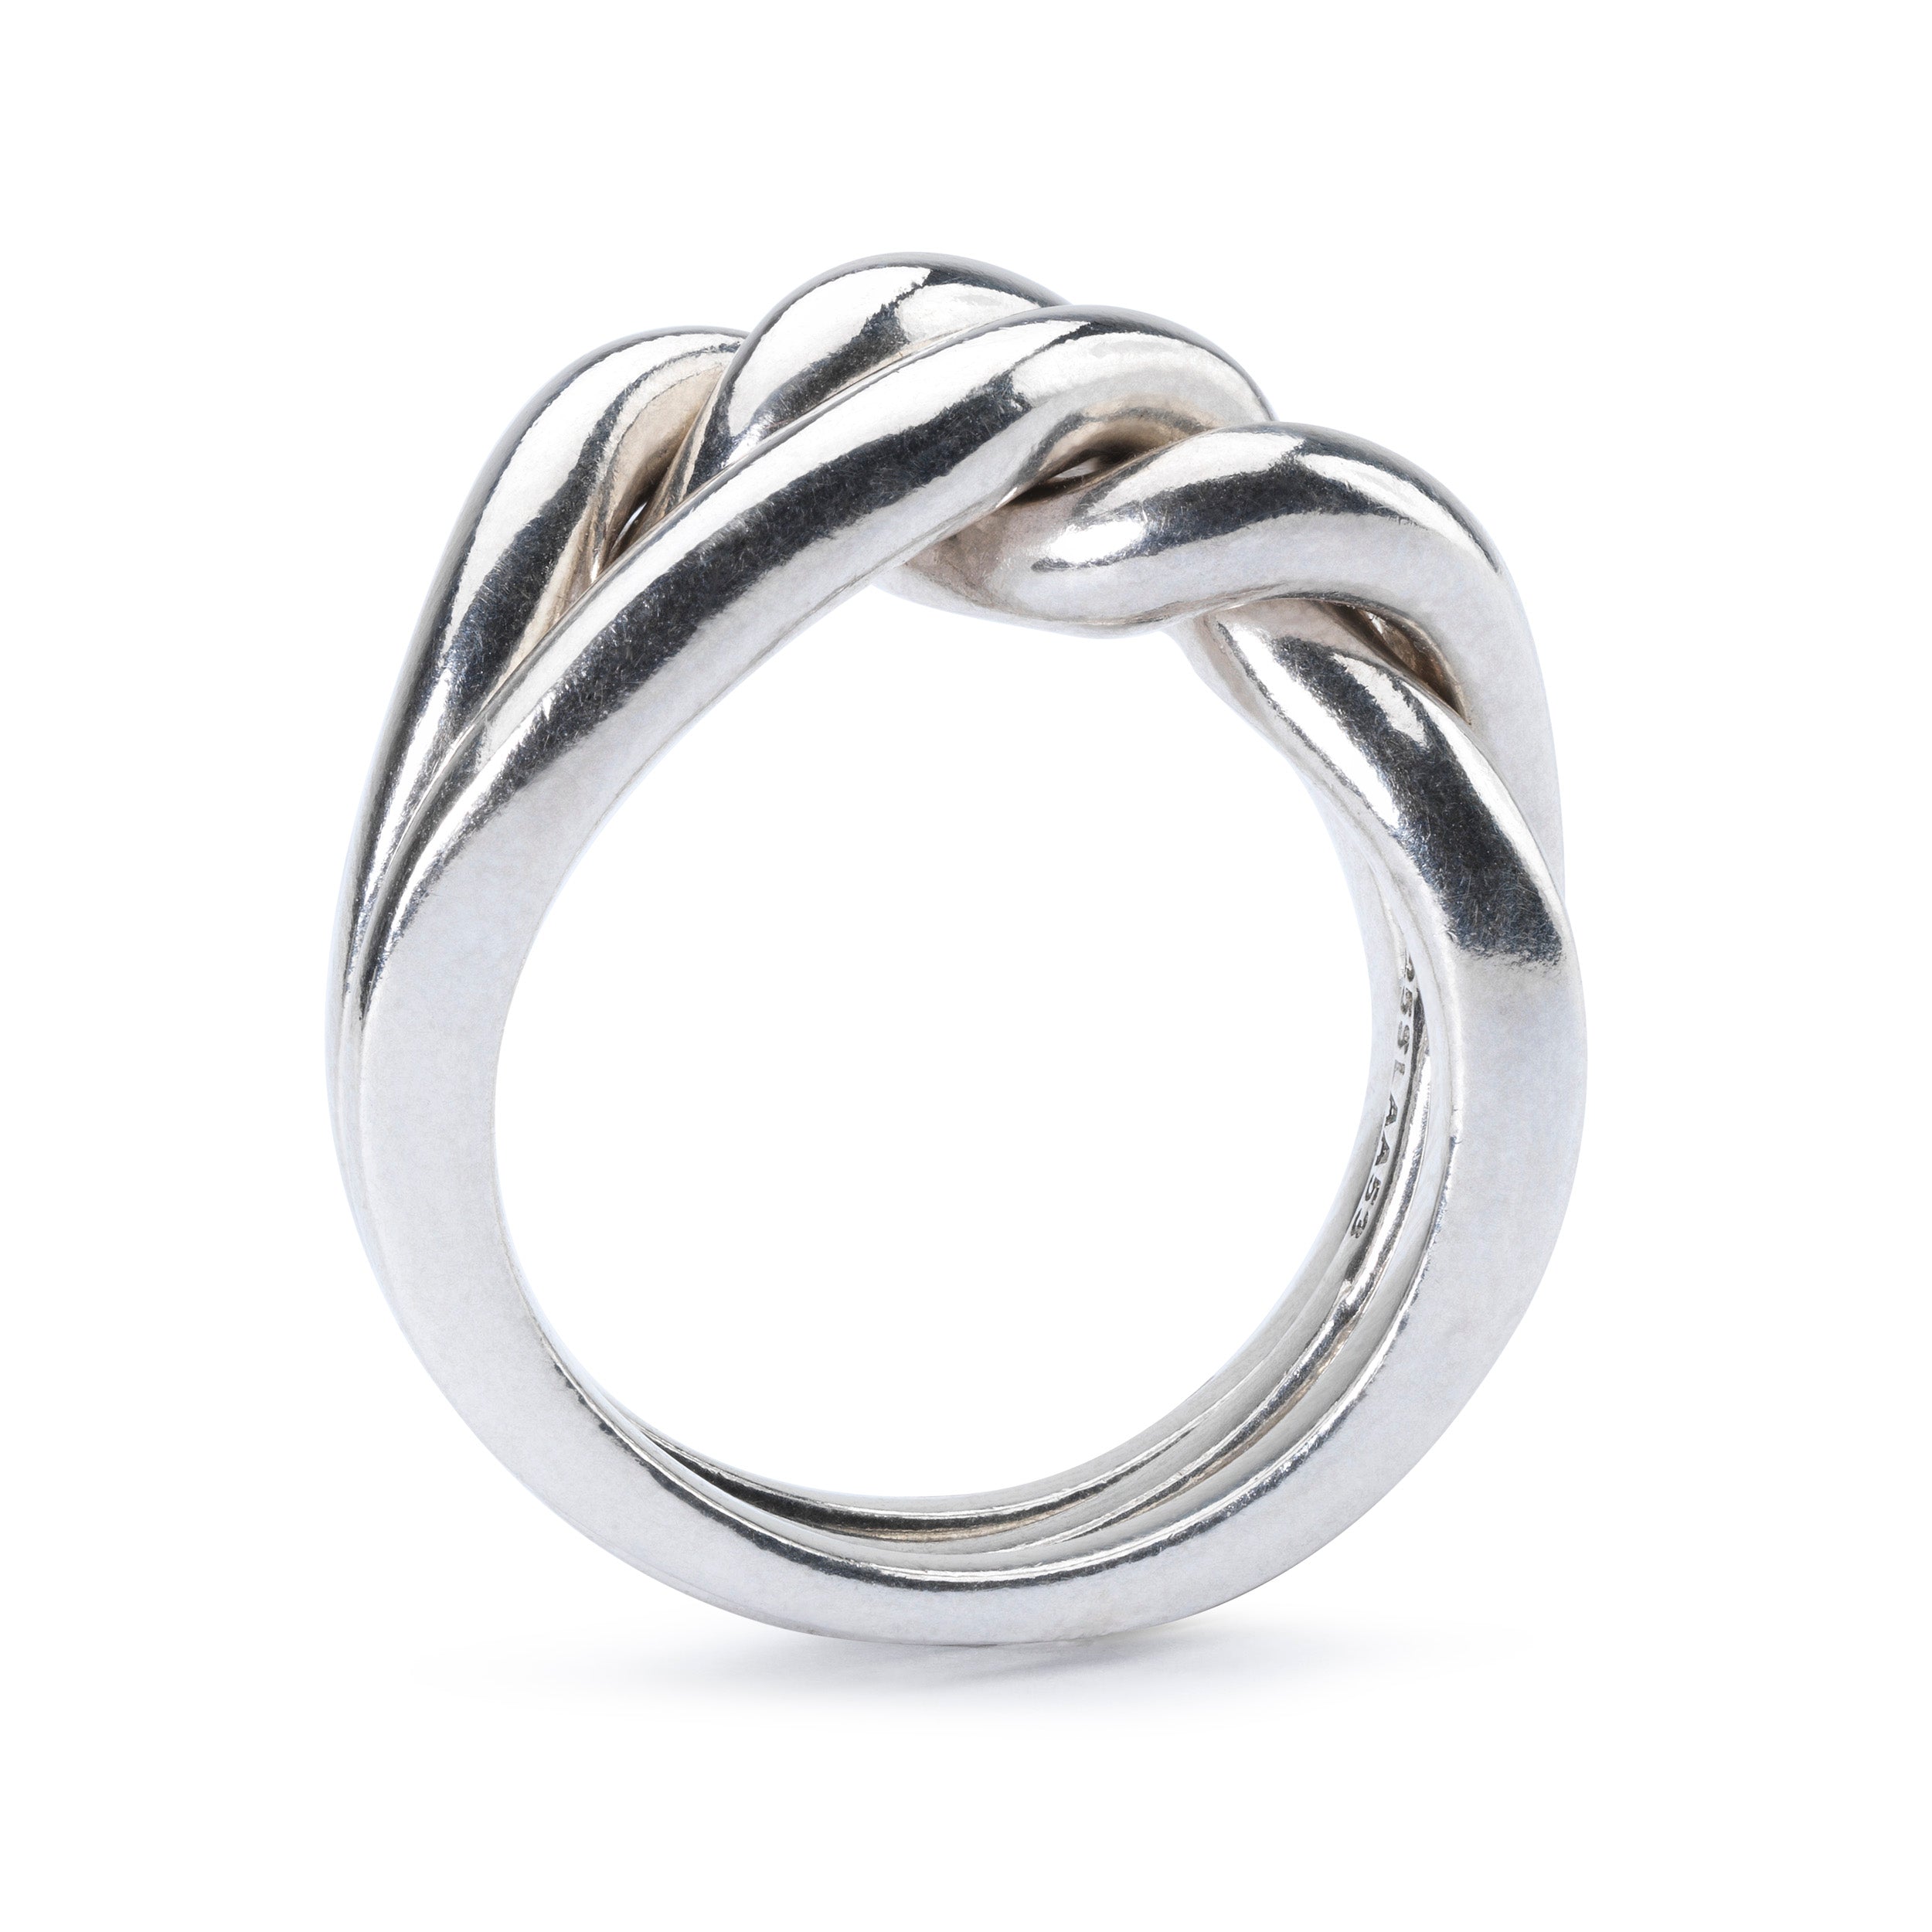 Strength, Courage and Wisdom Ring